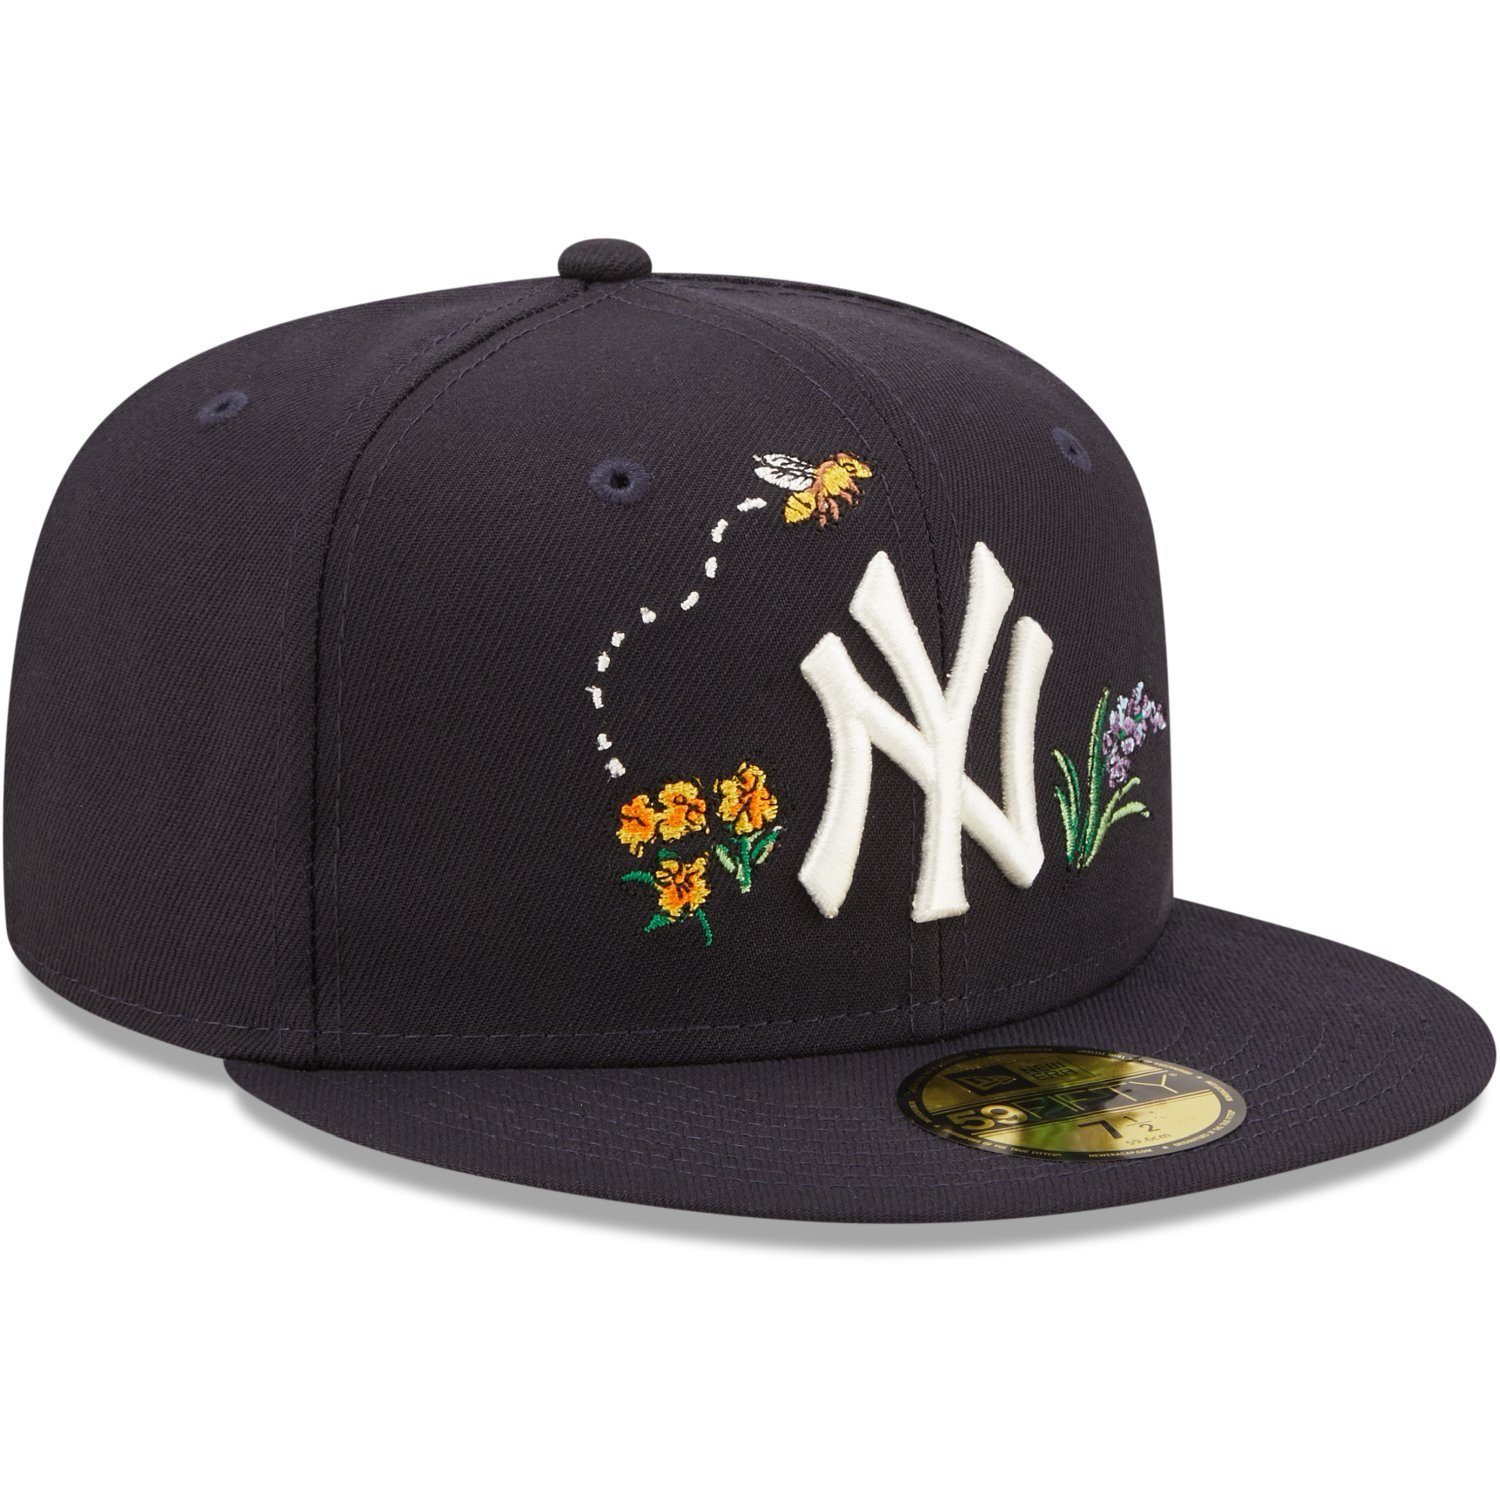 Cap Yankees WATER New New FLORAL 59Fifty Era Fitted York